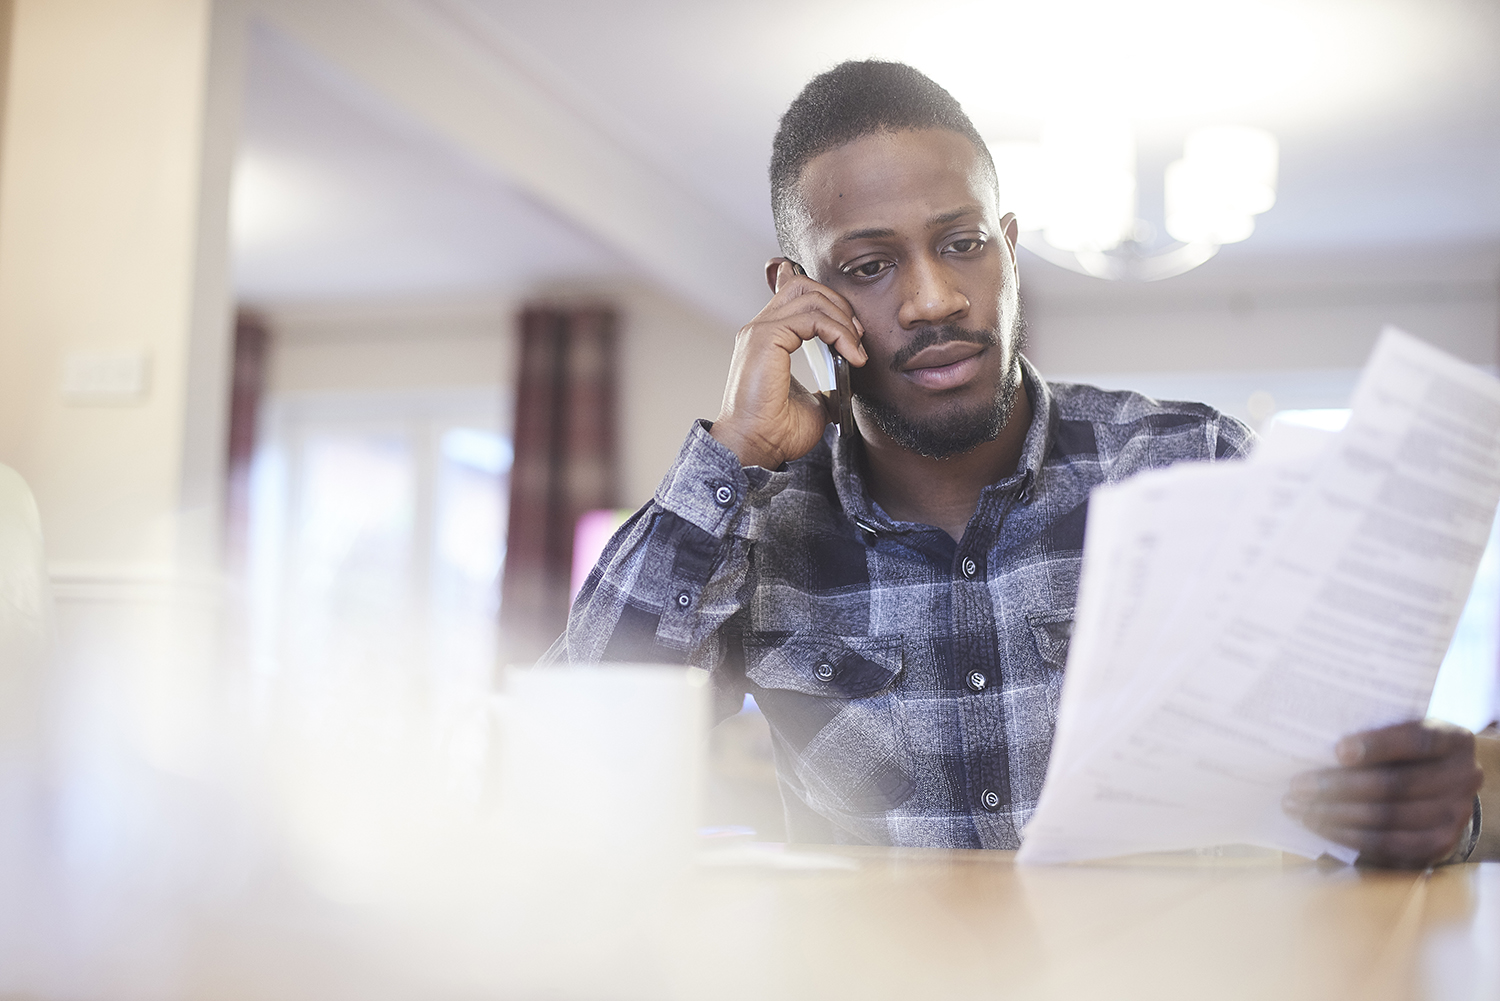 Young black male on the phone in a home environment holding paperwork